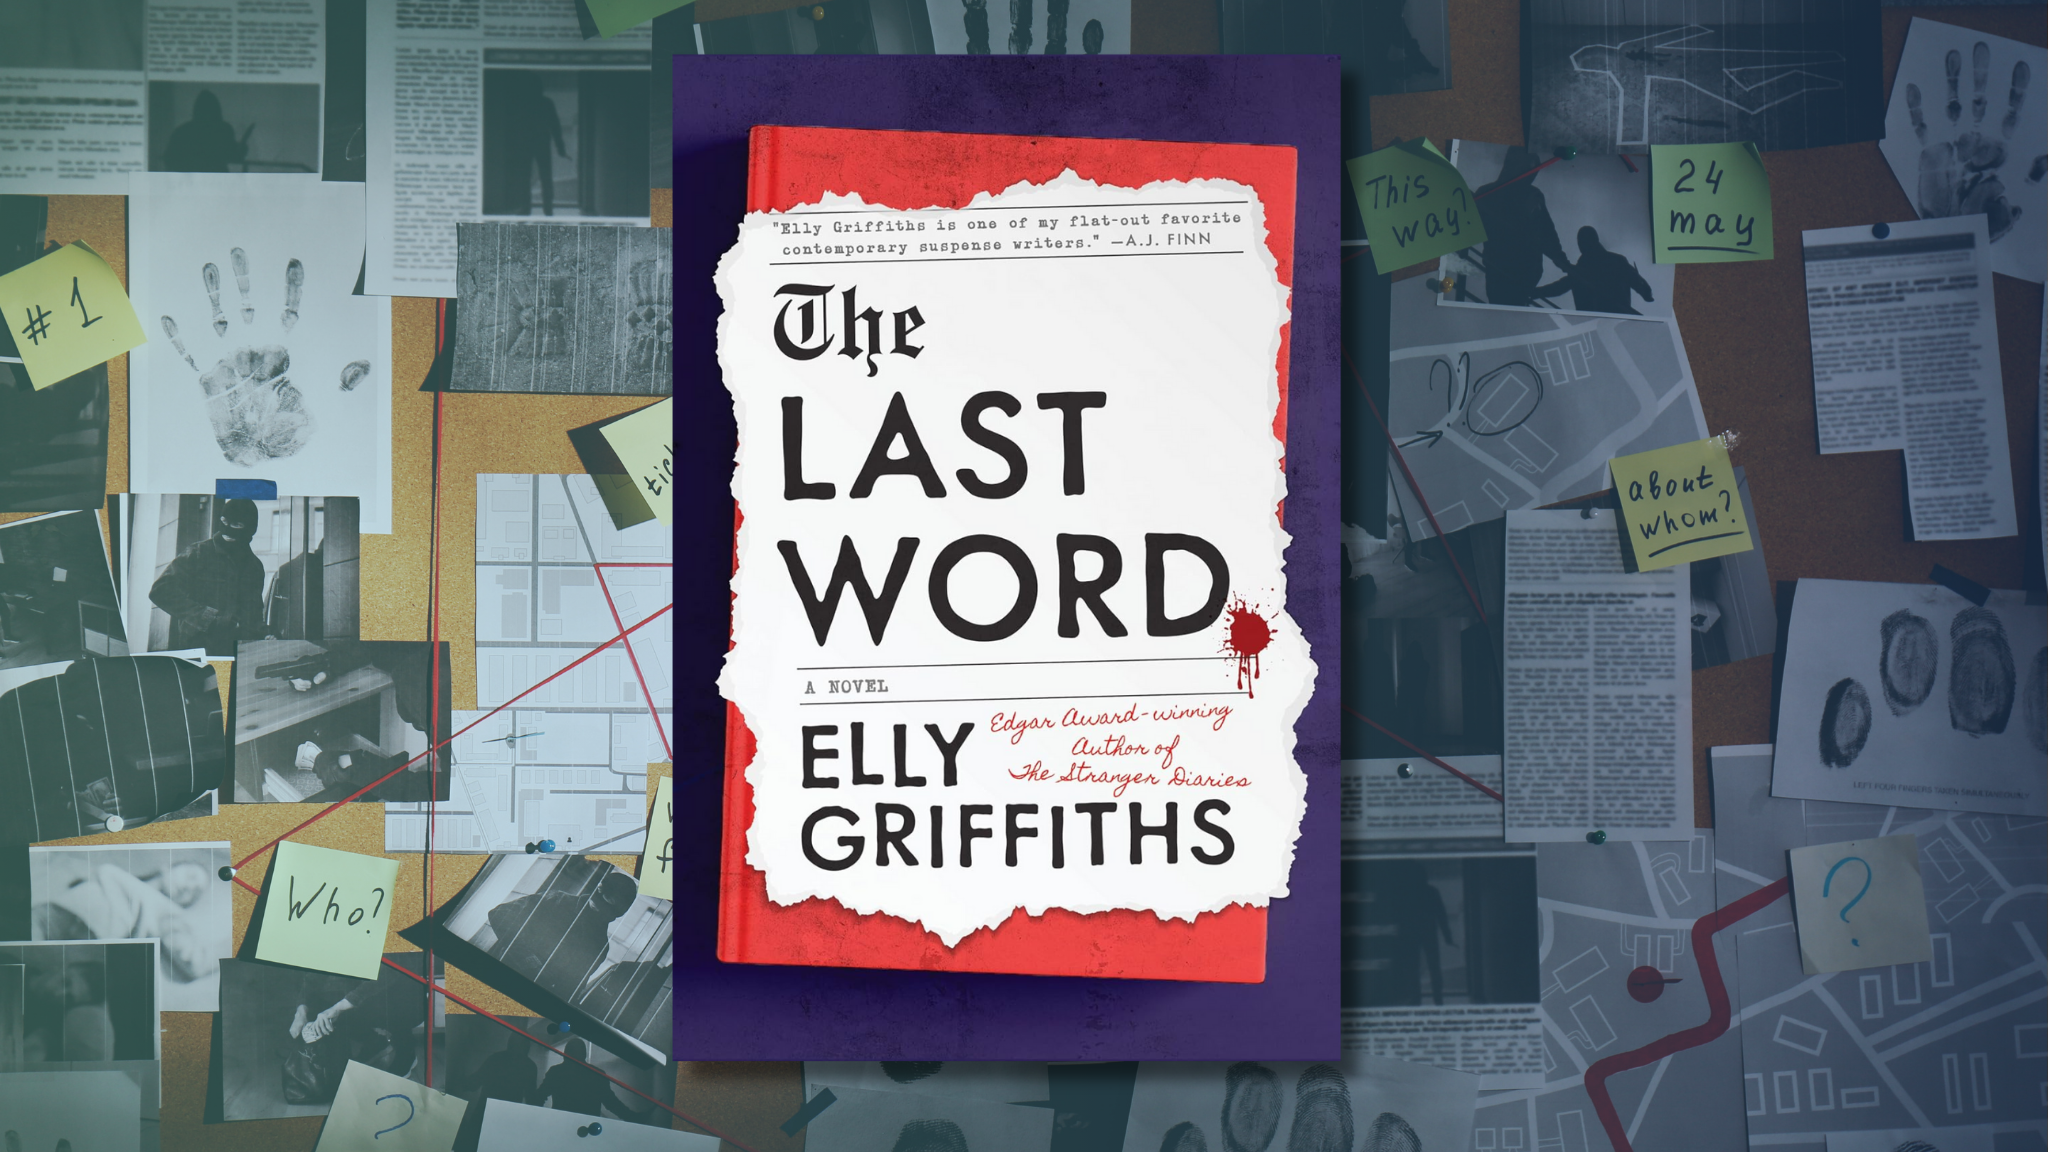 The Last Word by Elly Griffiths